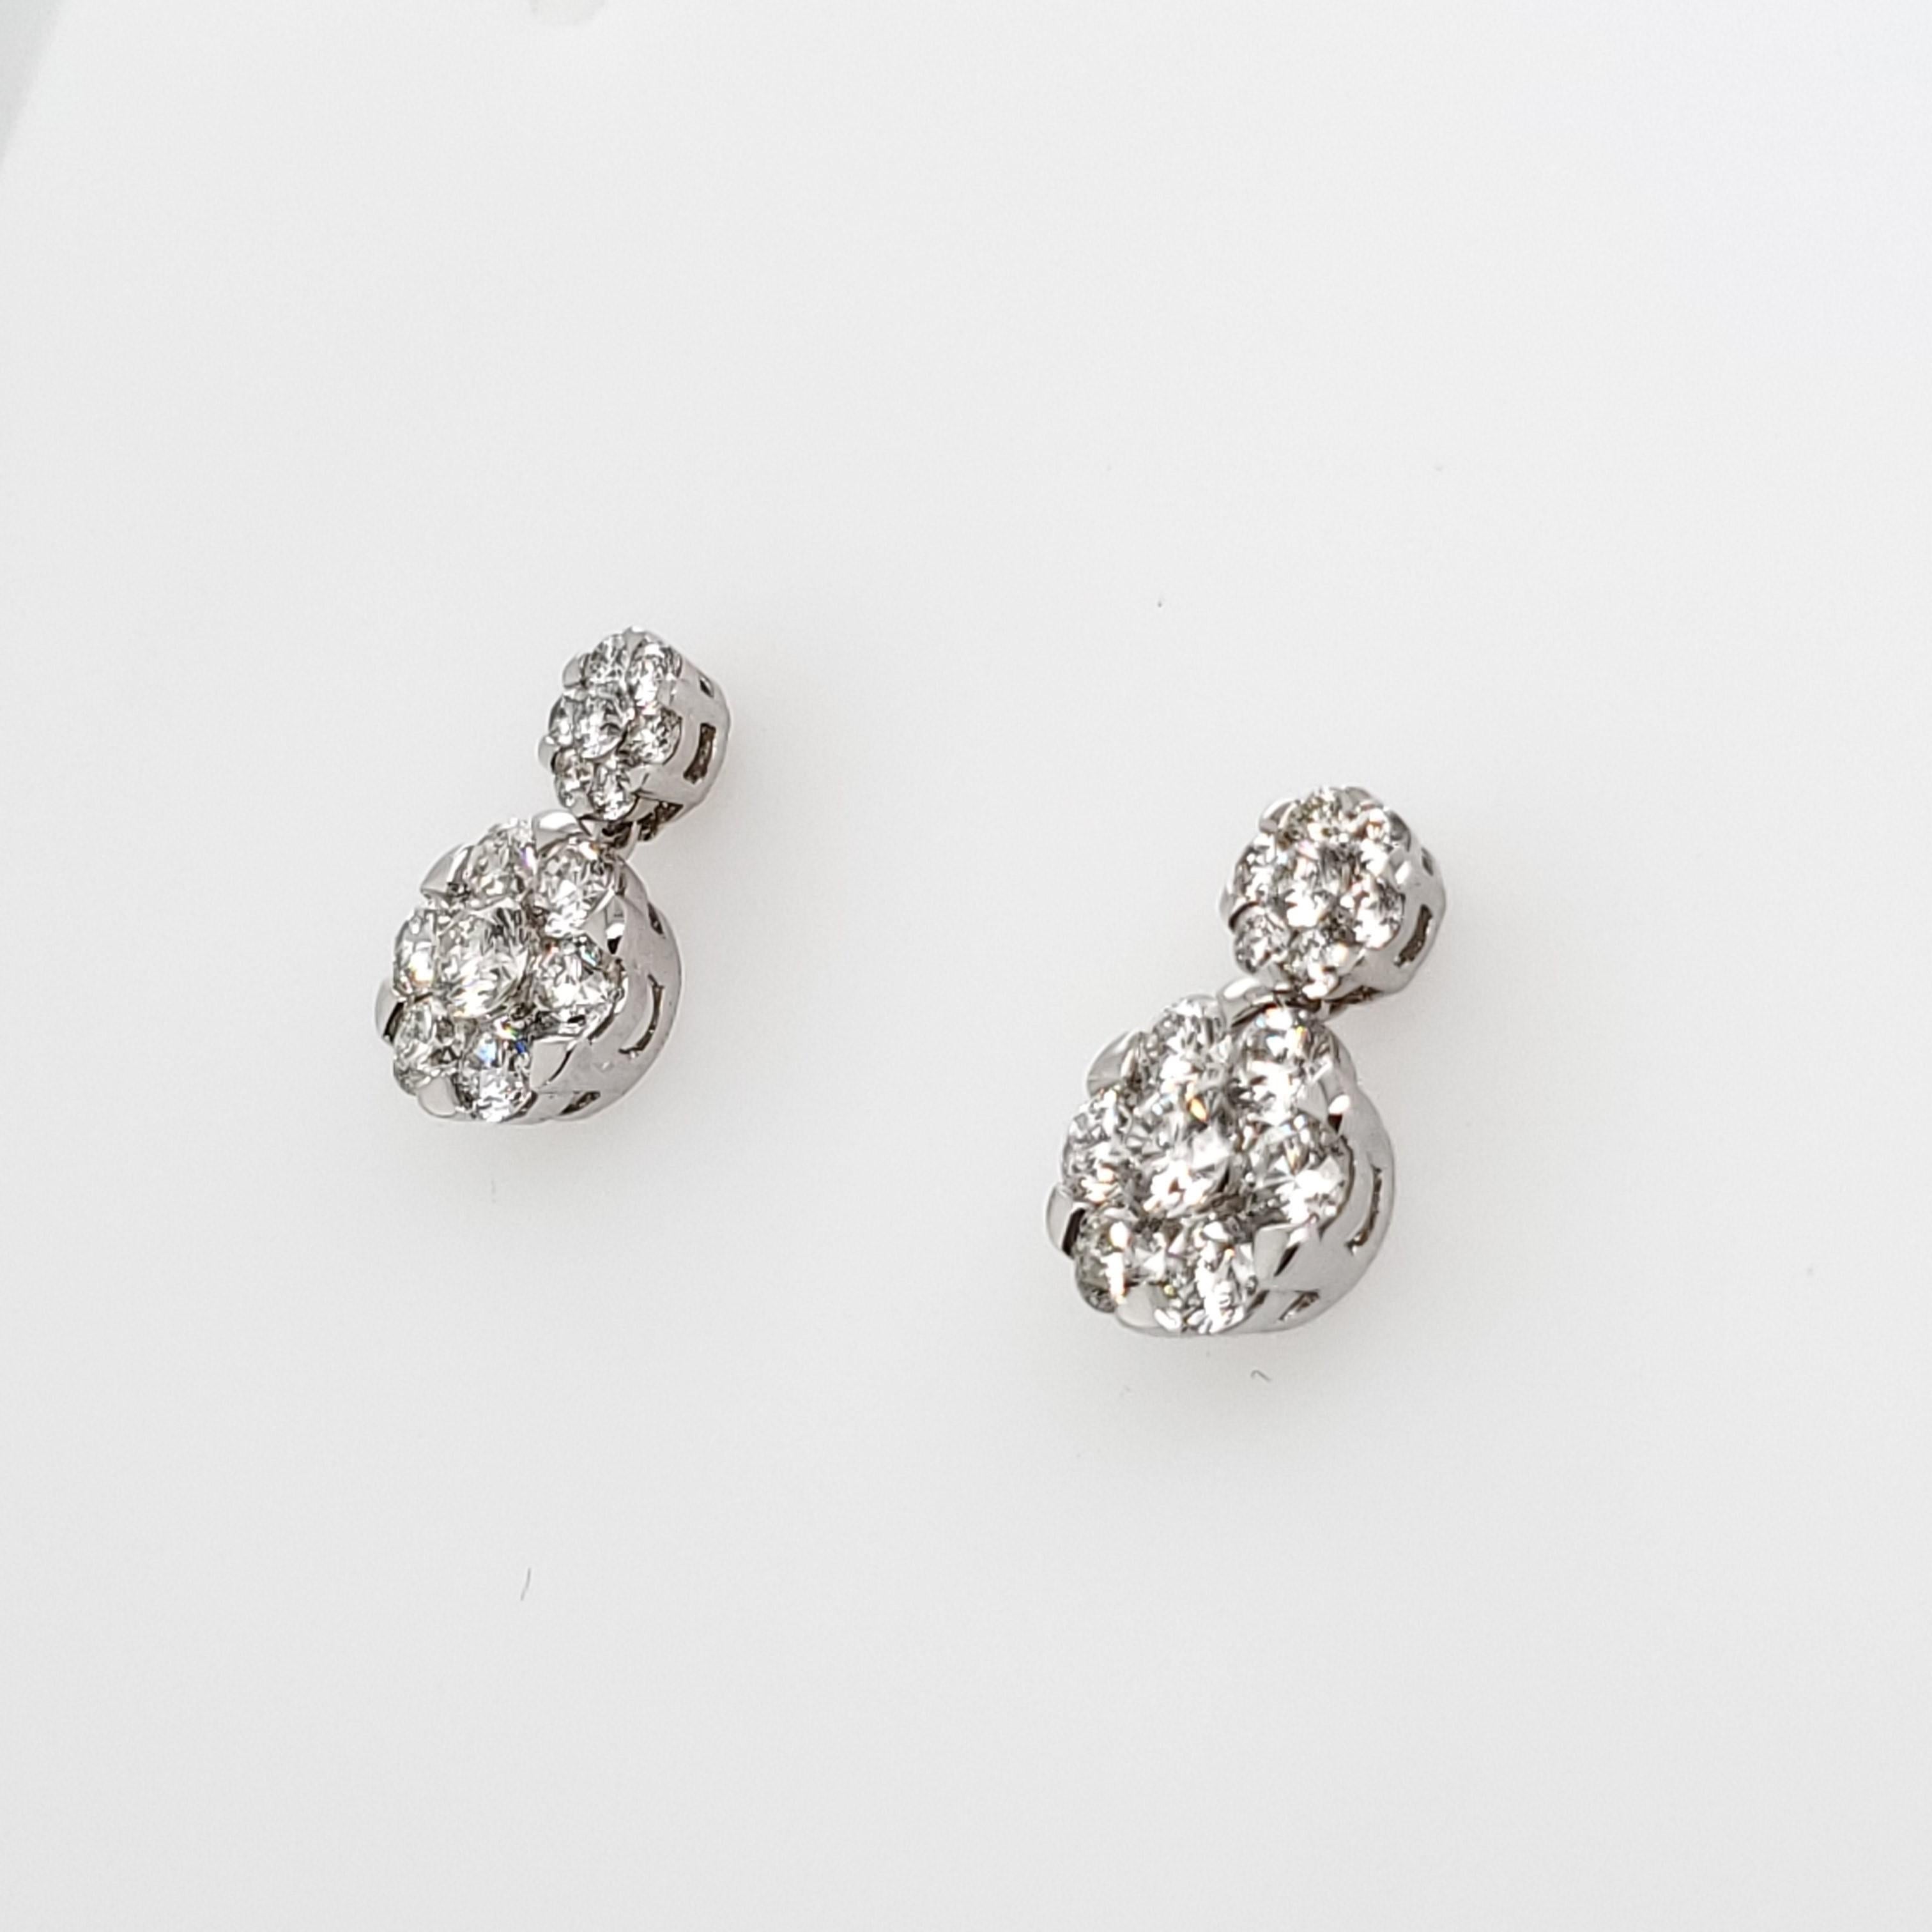 Beautiful Cluster Flower Dangle Diamond Earrings in 18K White Gold
Round Brilliant Cut Diamond total Carat Weight 1.97 ct G-H Color and SI Clarity
Ready to be shipped today